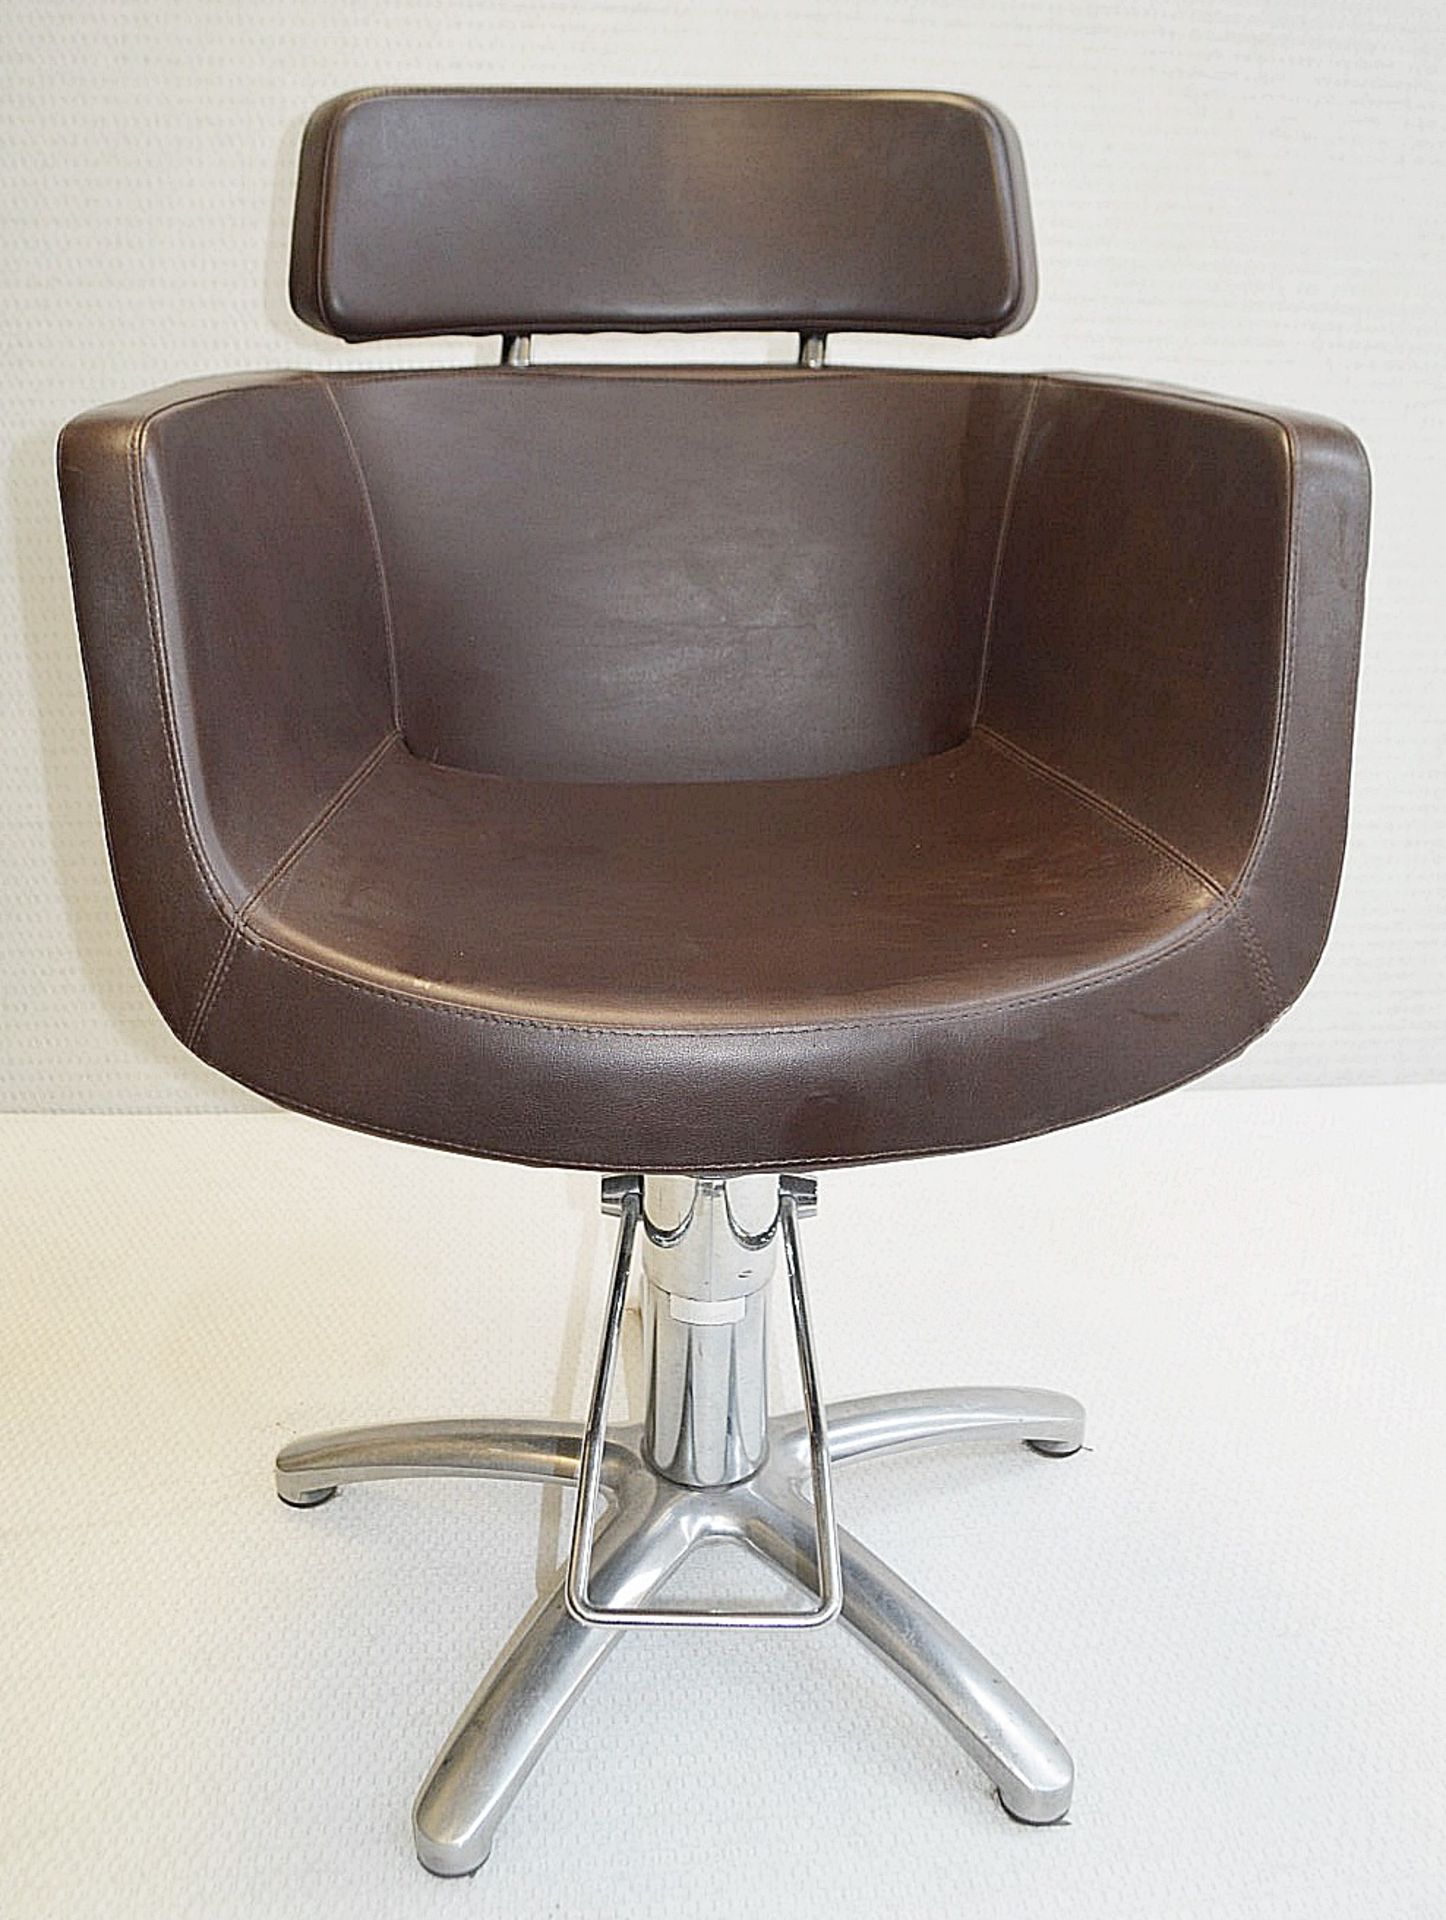 5 x Malet Branded Professional Hairdressing Salon Swivel Chairs In Brown - Each Is Supplied With A - Image 6 of 7